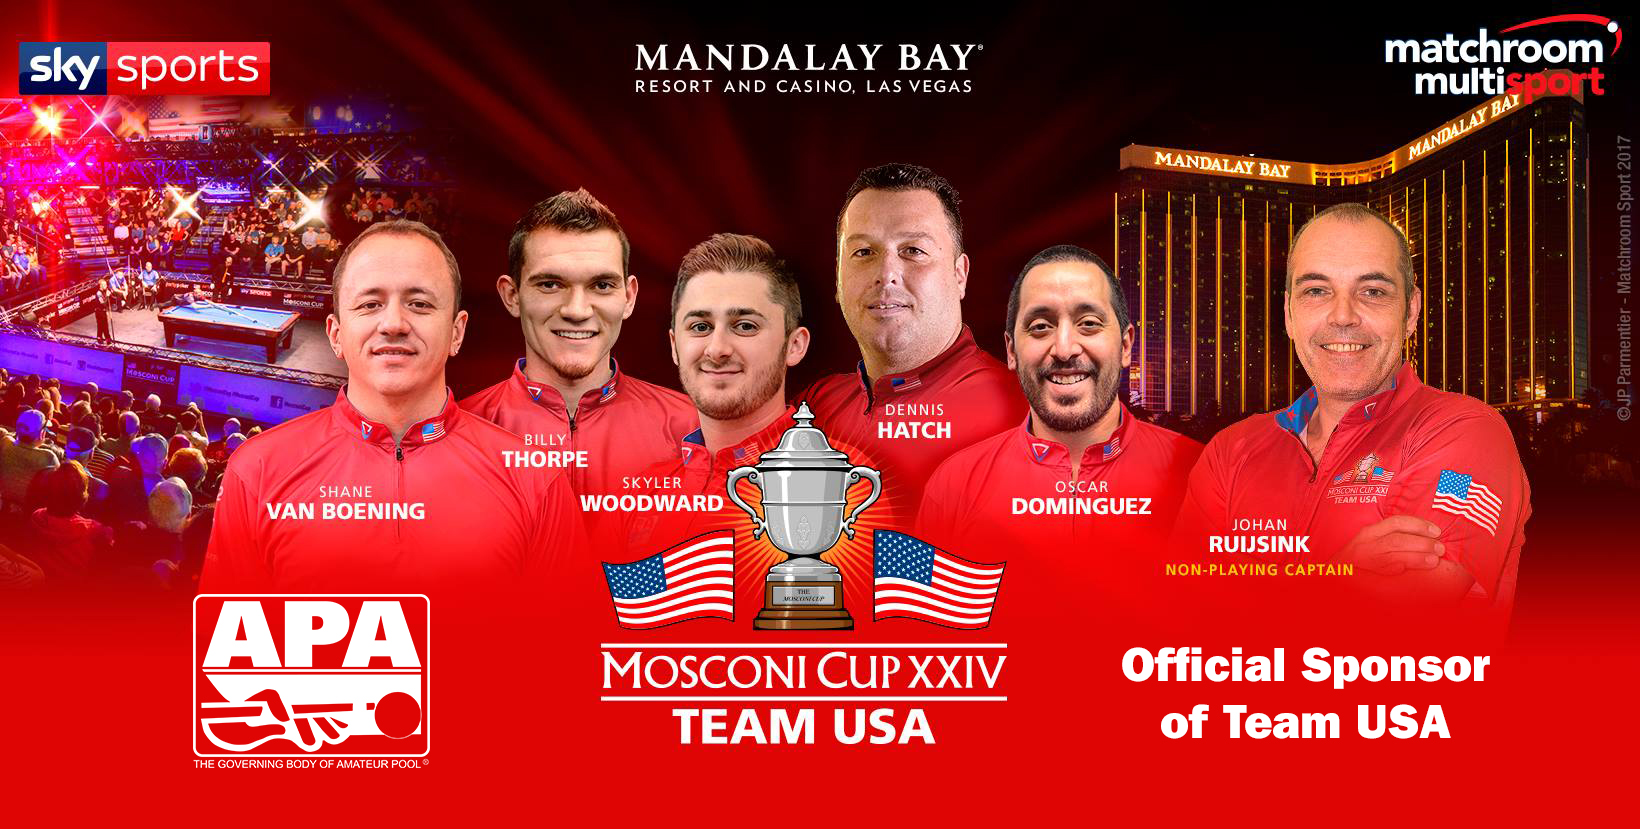 APA Named Official Sponsor of Team USA in Mosconi Cup American